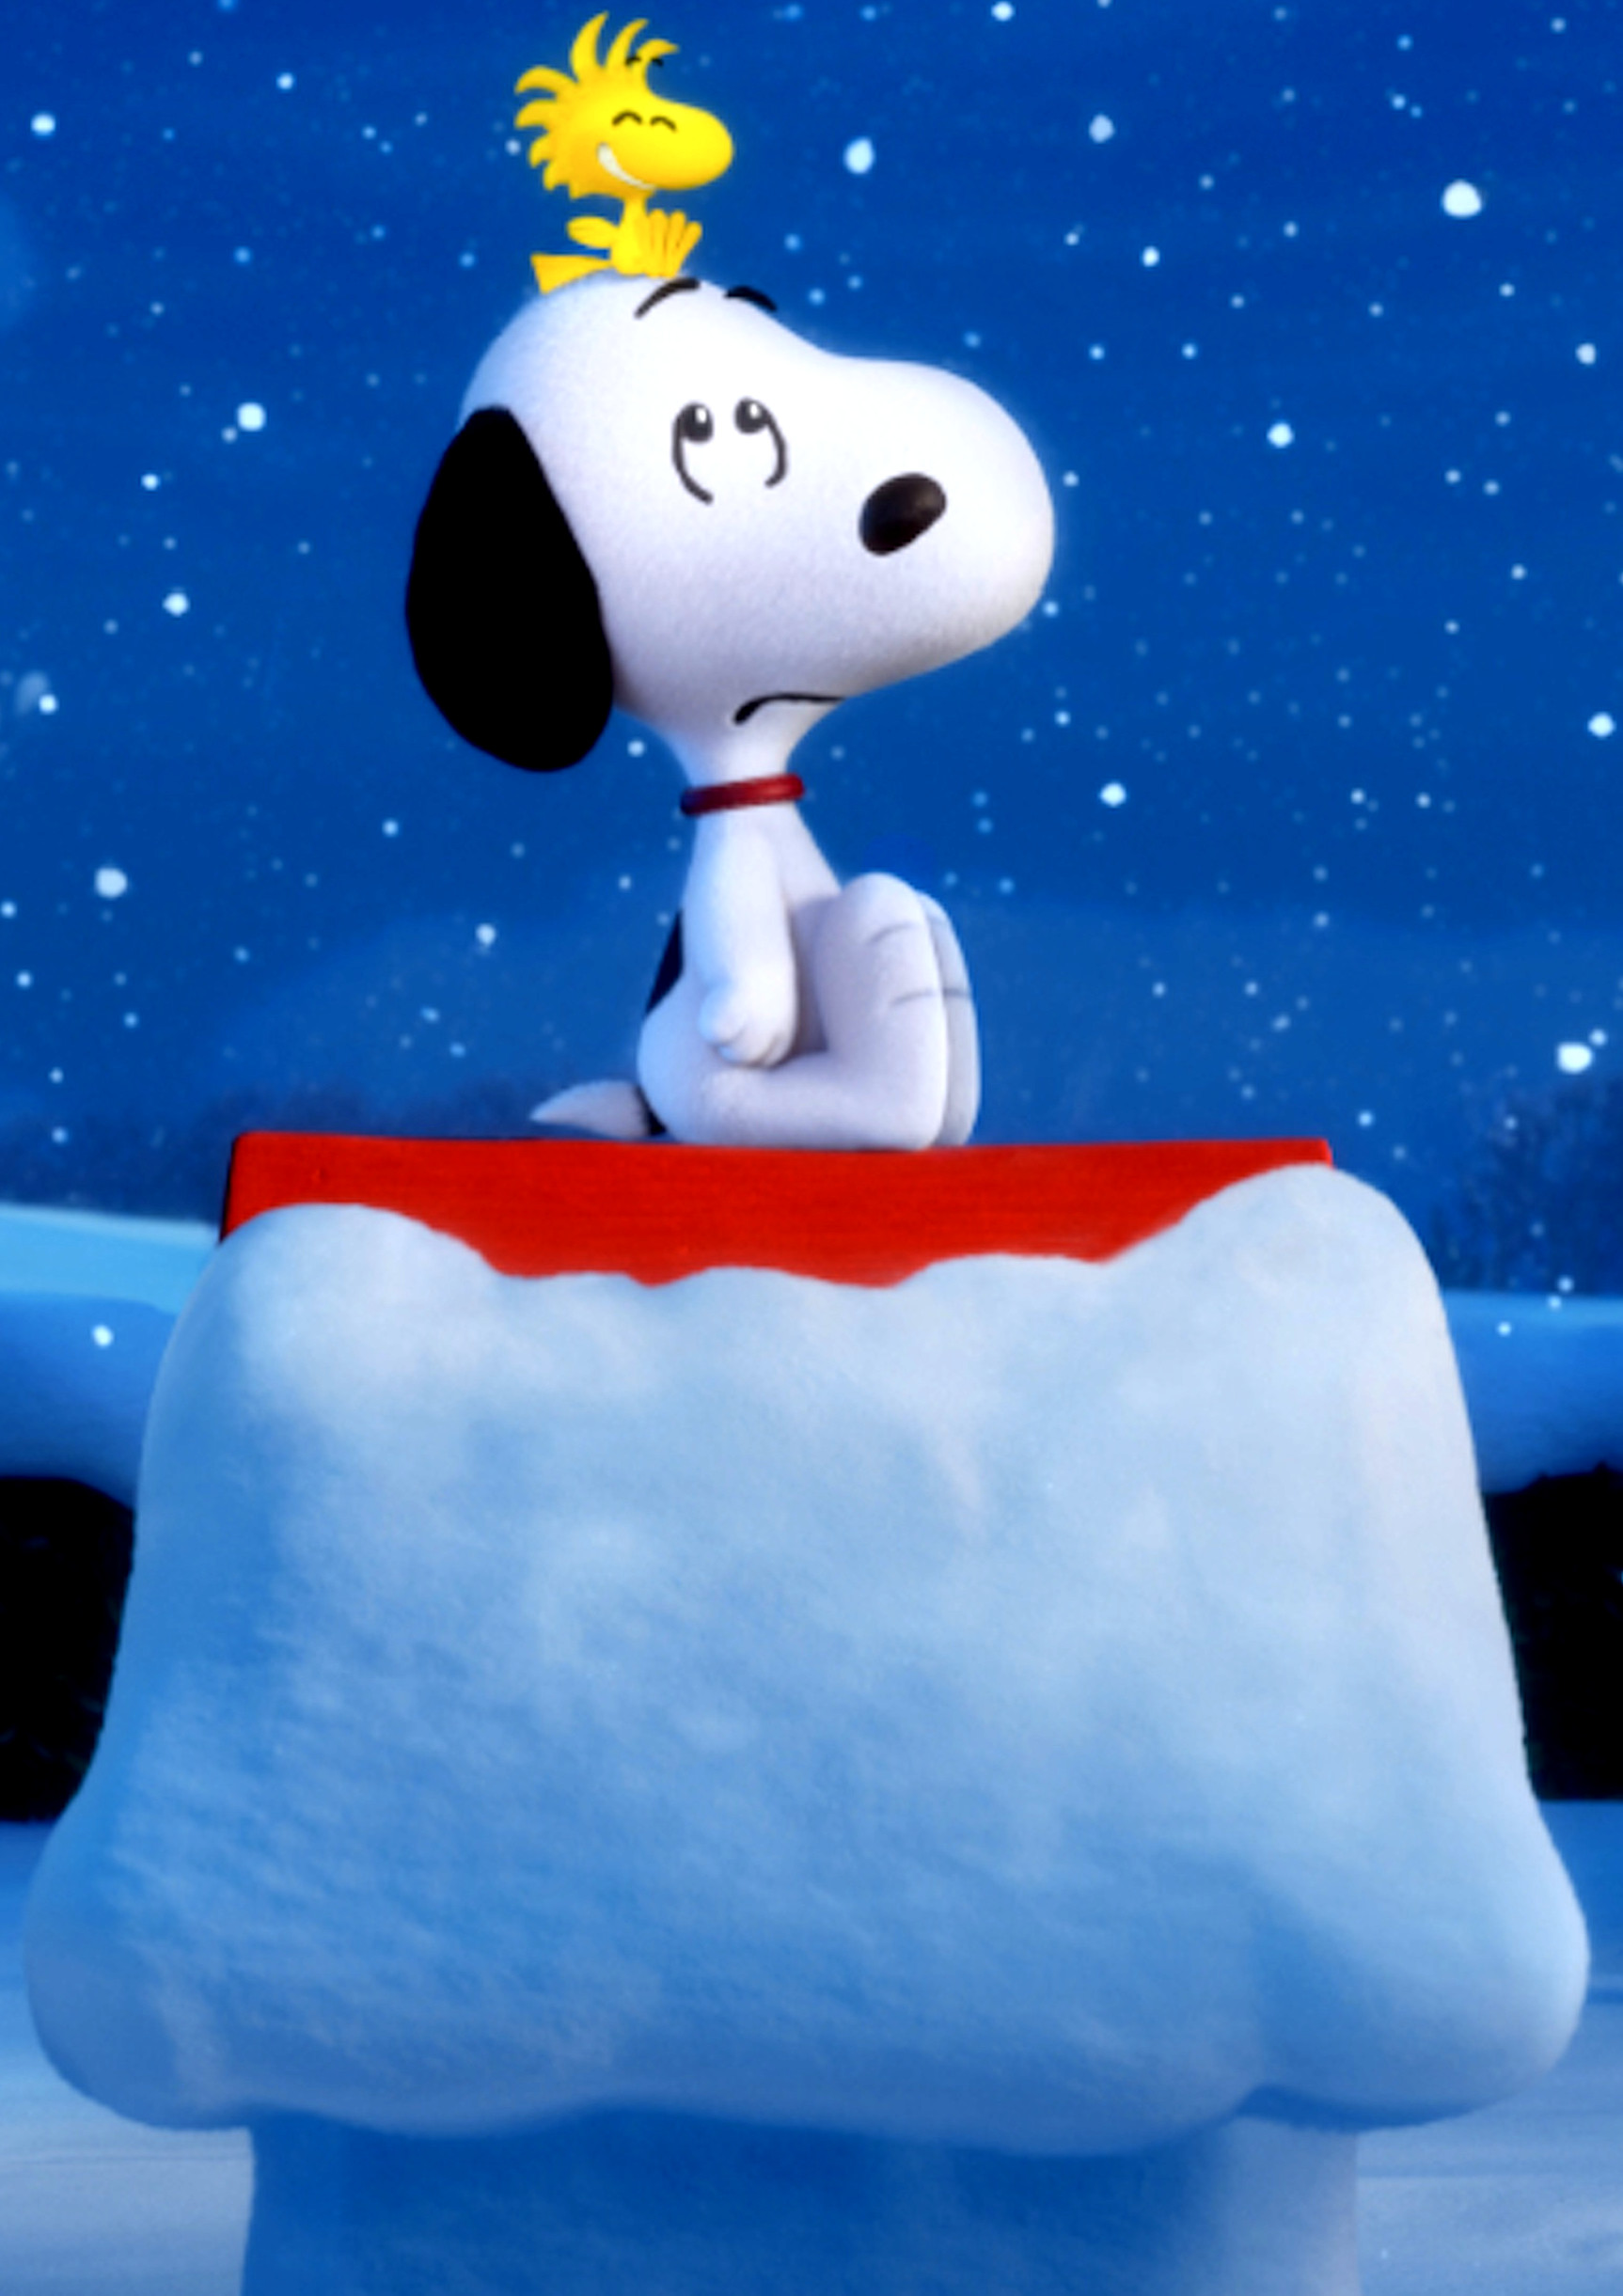 1726x2442 ... The Peanuts Movie (Snoopy And Woodstock) by BradSnoopy97